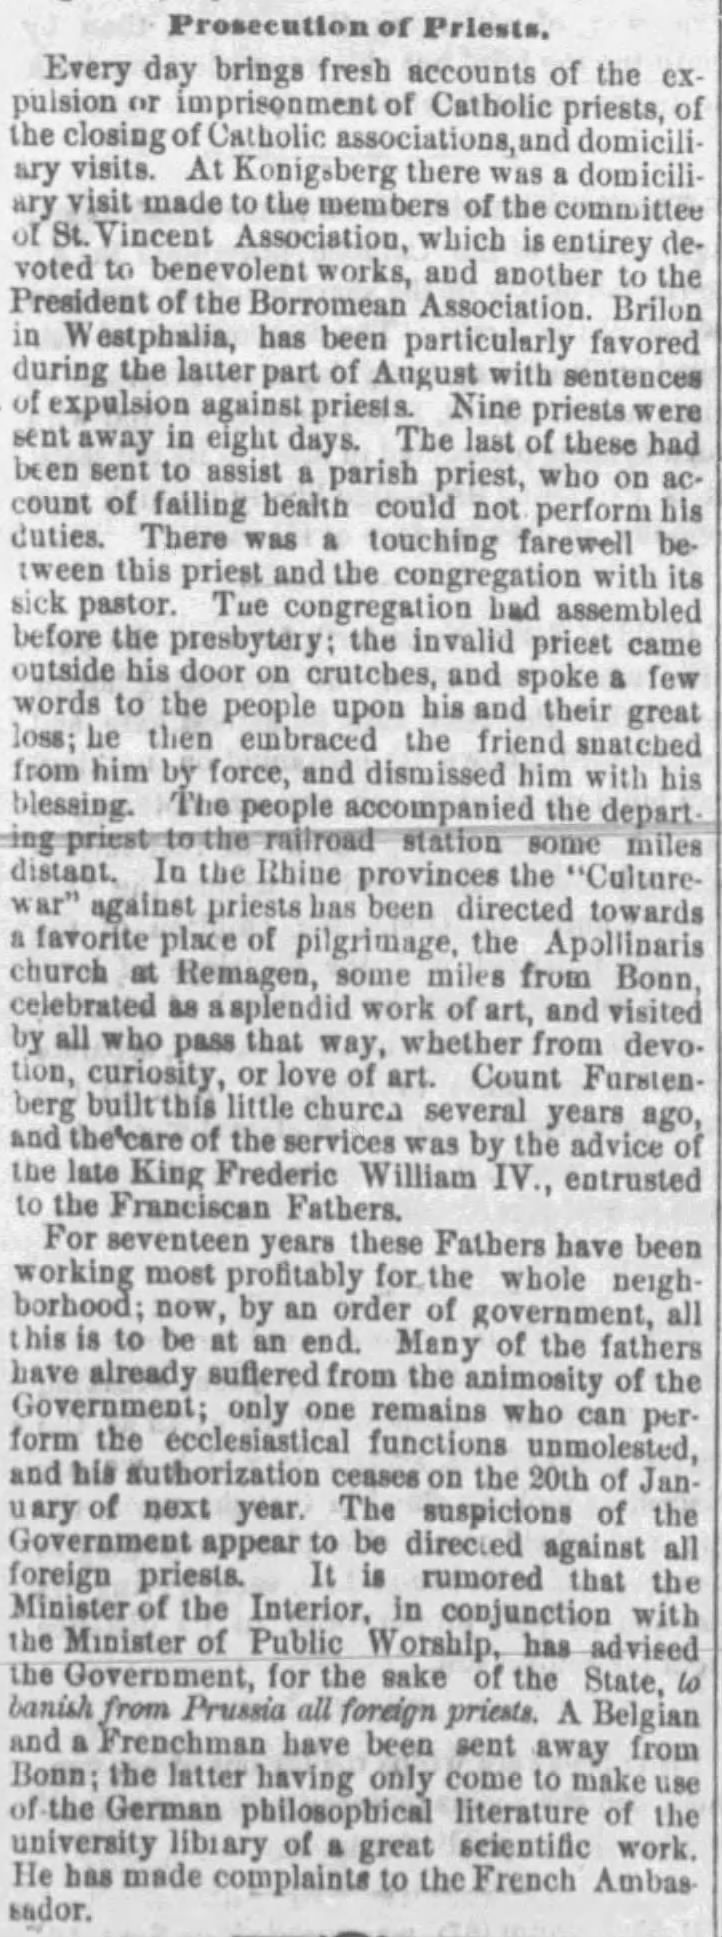 Prosecution of priests (Culture War reference) (1874)